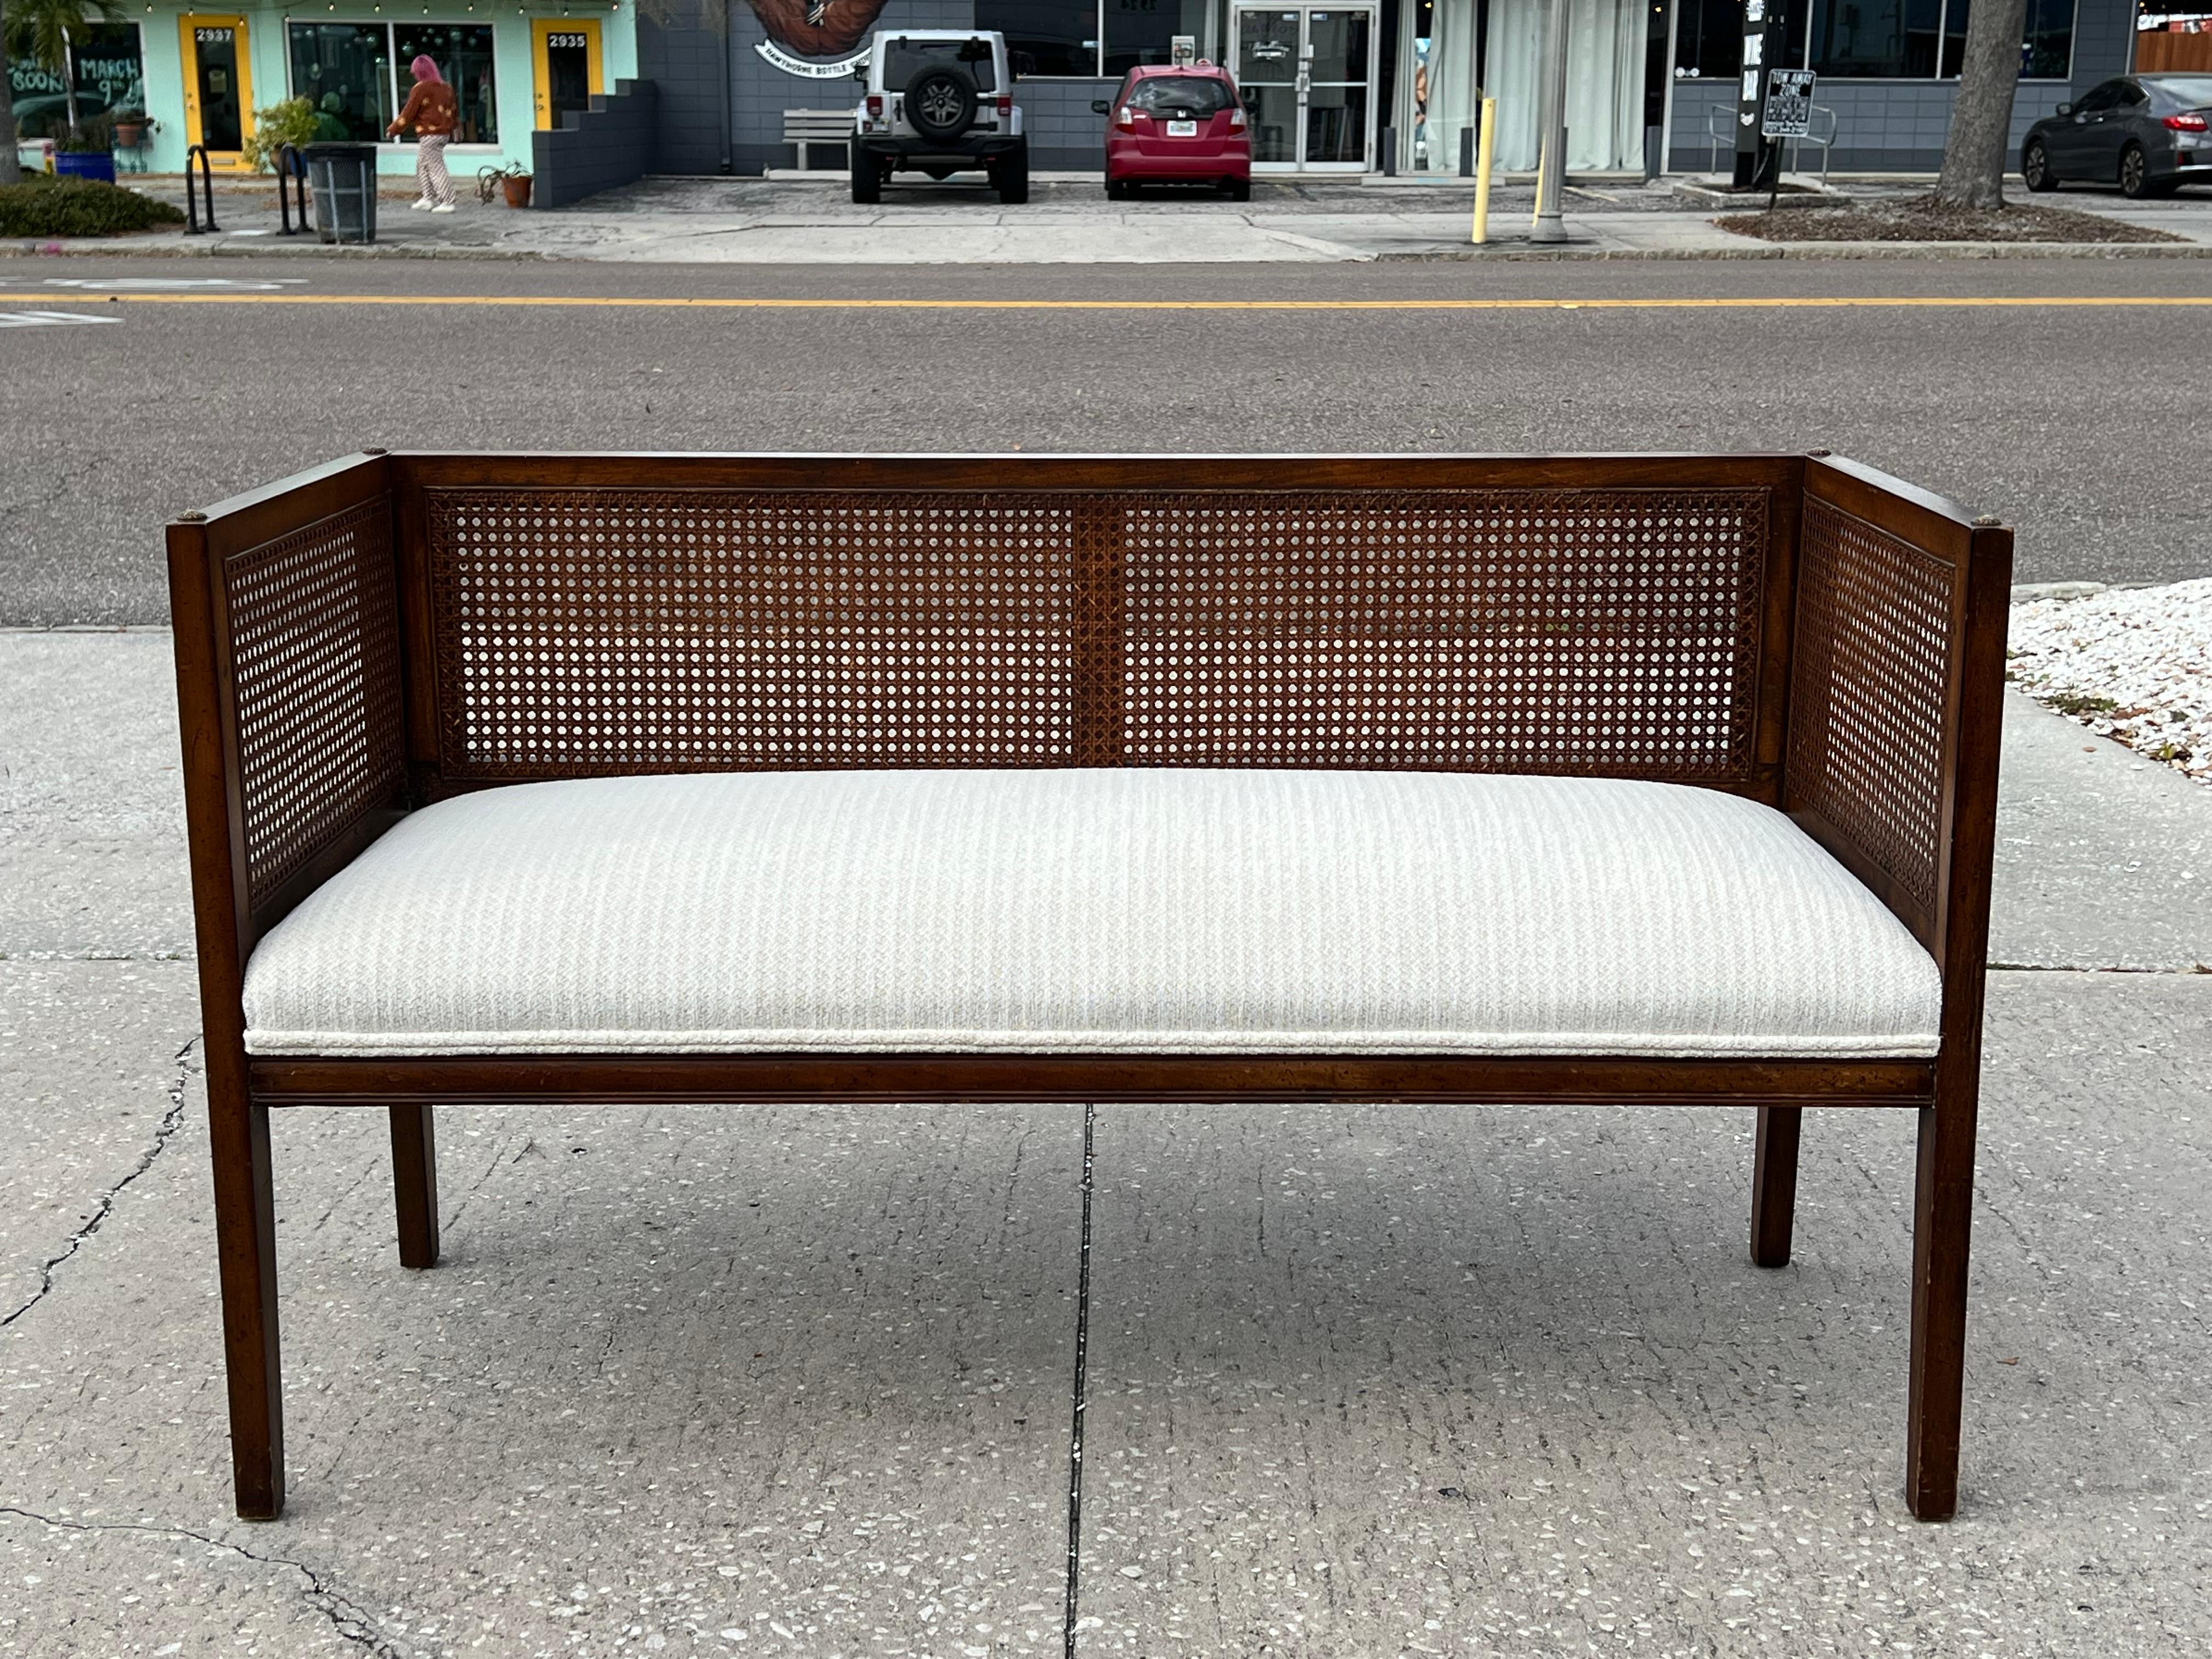 A classic enryway bench in Hollywood Regency style. Caned and upholstered seat. Original 1950's speckled finish. Reupholstered.